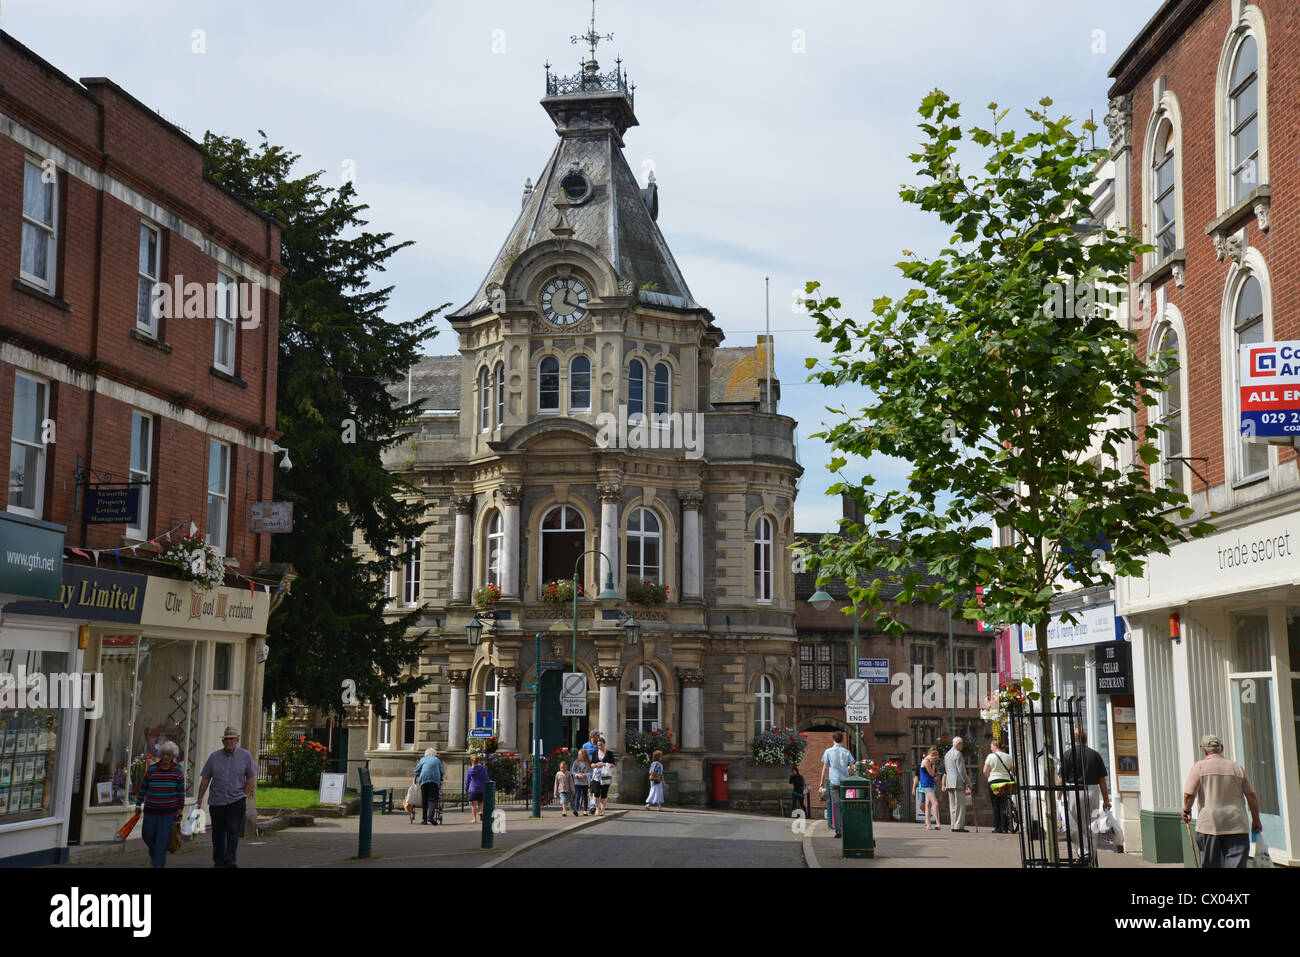 Town Hall from Fore Street, Tiverton, Devon, England, United Kingdom Stock Photo